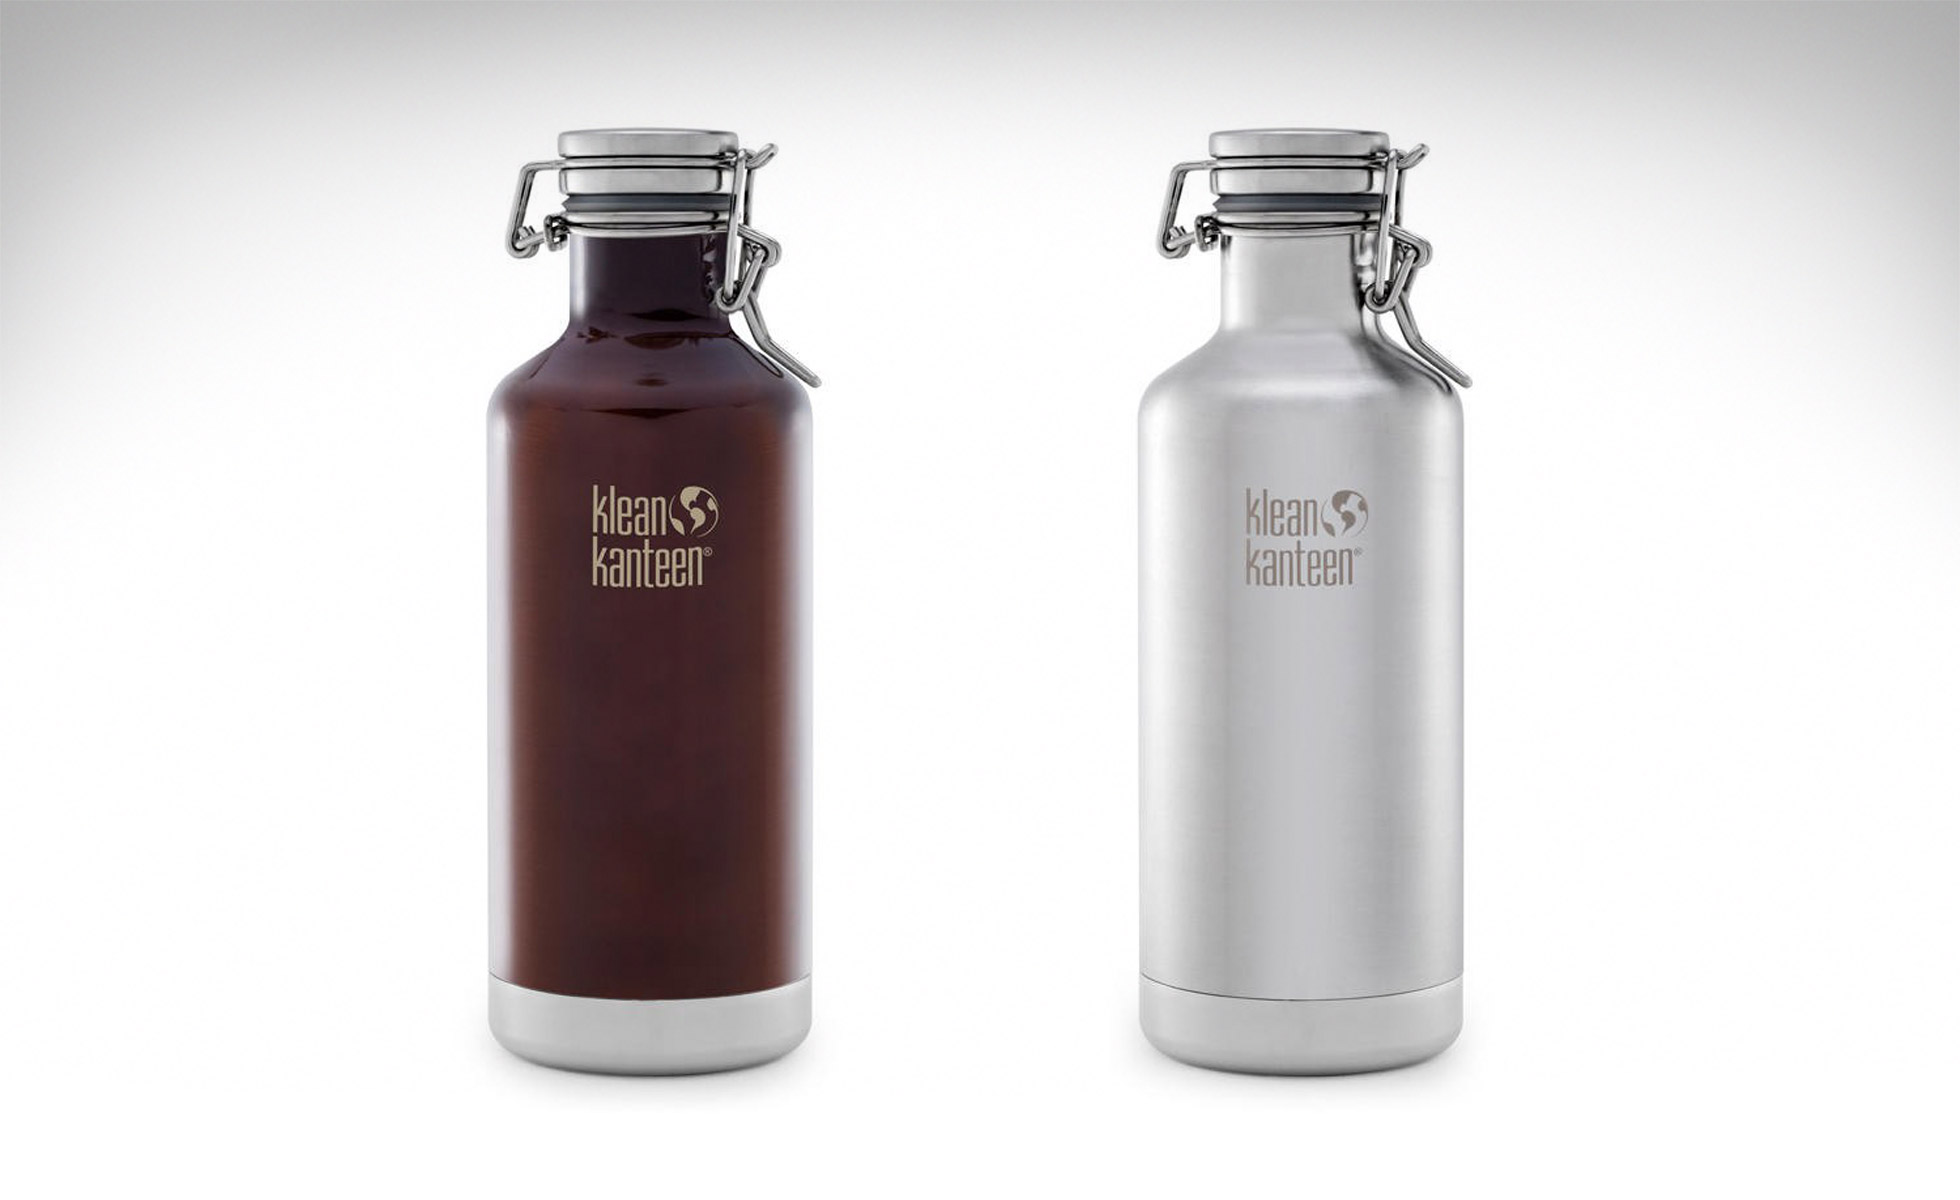 Klean Kanteen’s insulated Beer Growler – tailgating gear